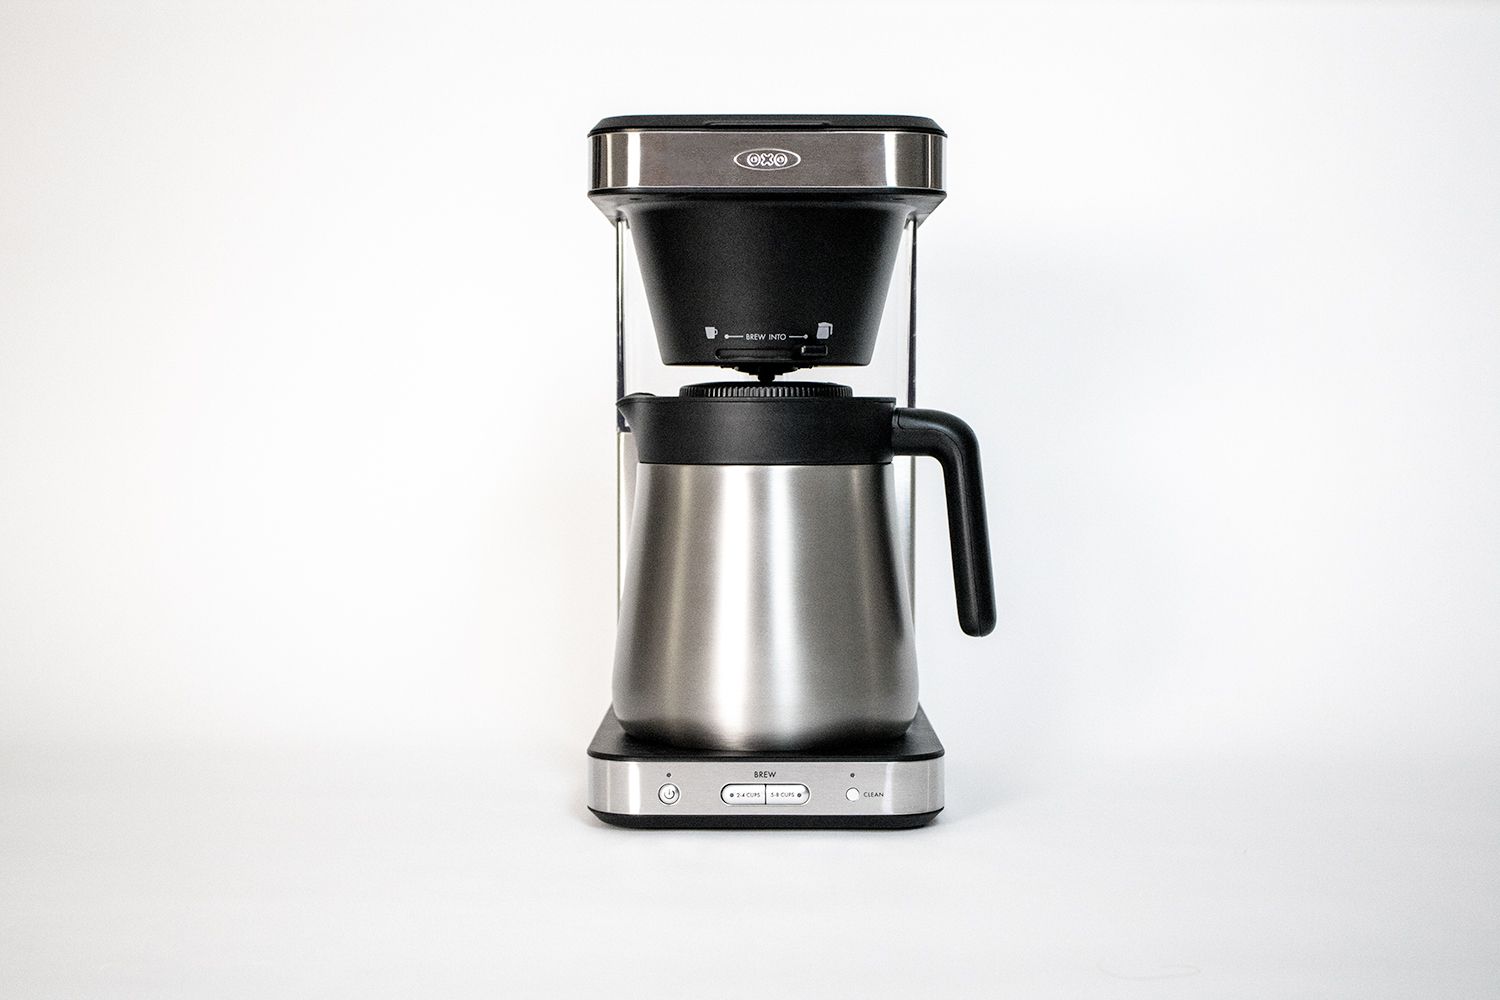 The OXO 8-Cup coffee maker against a white background